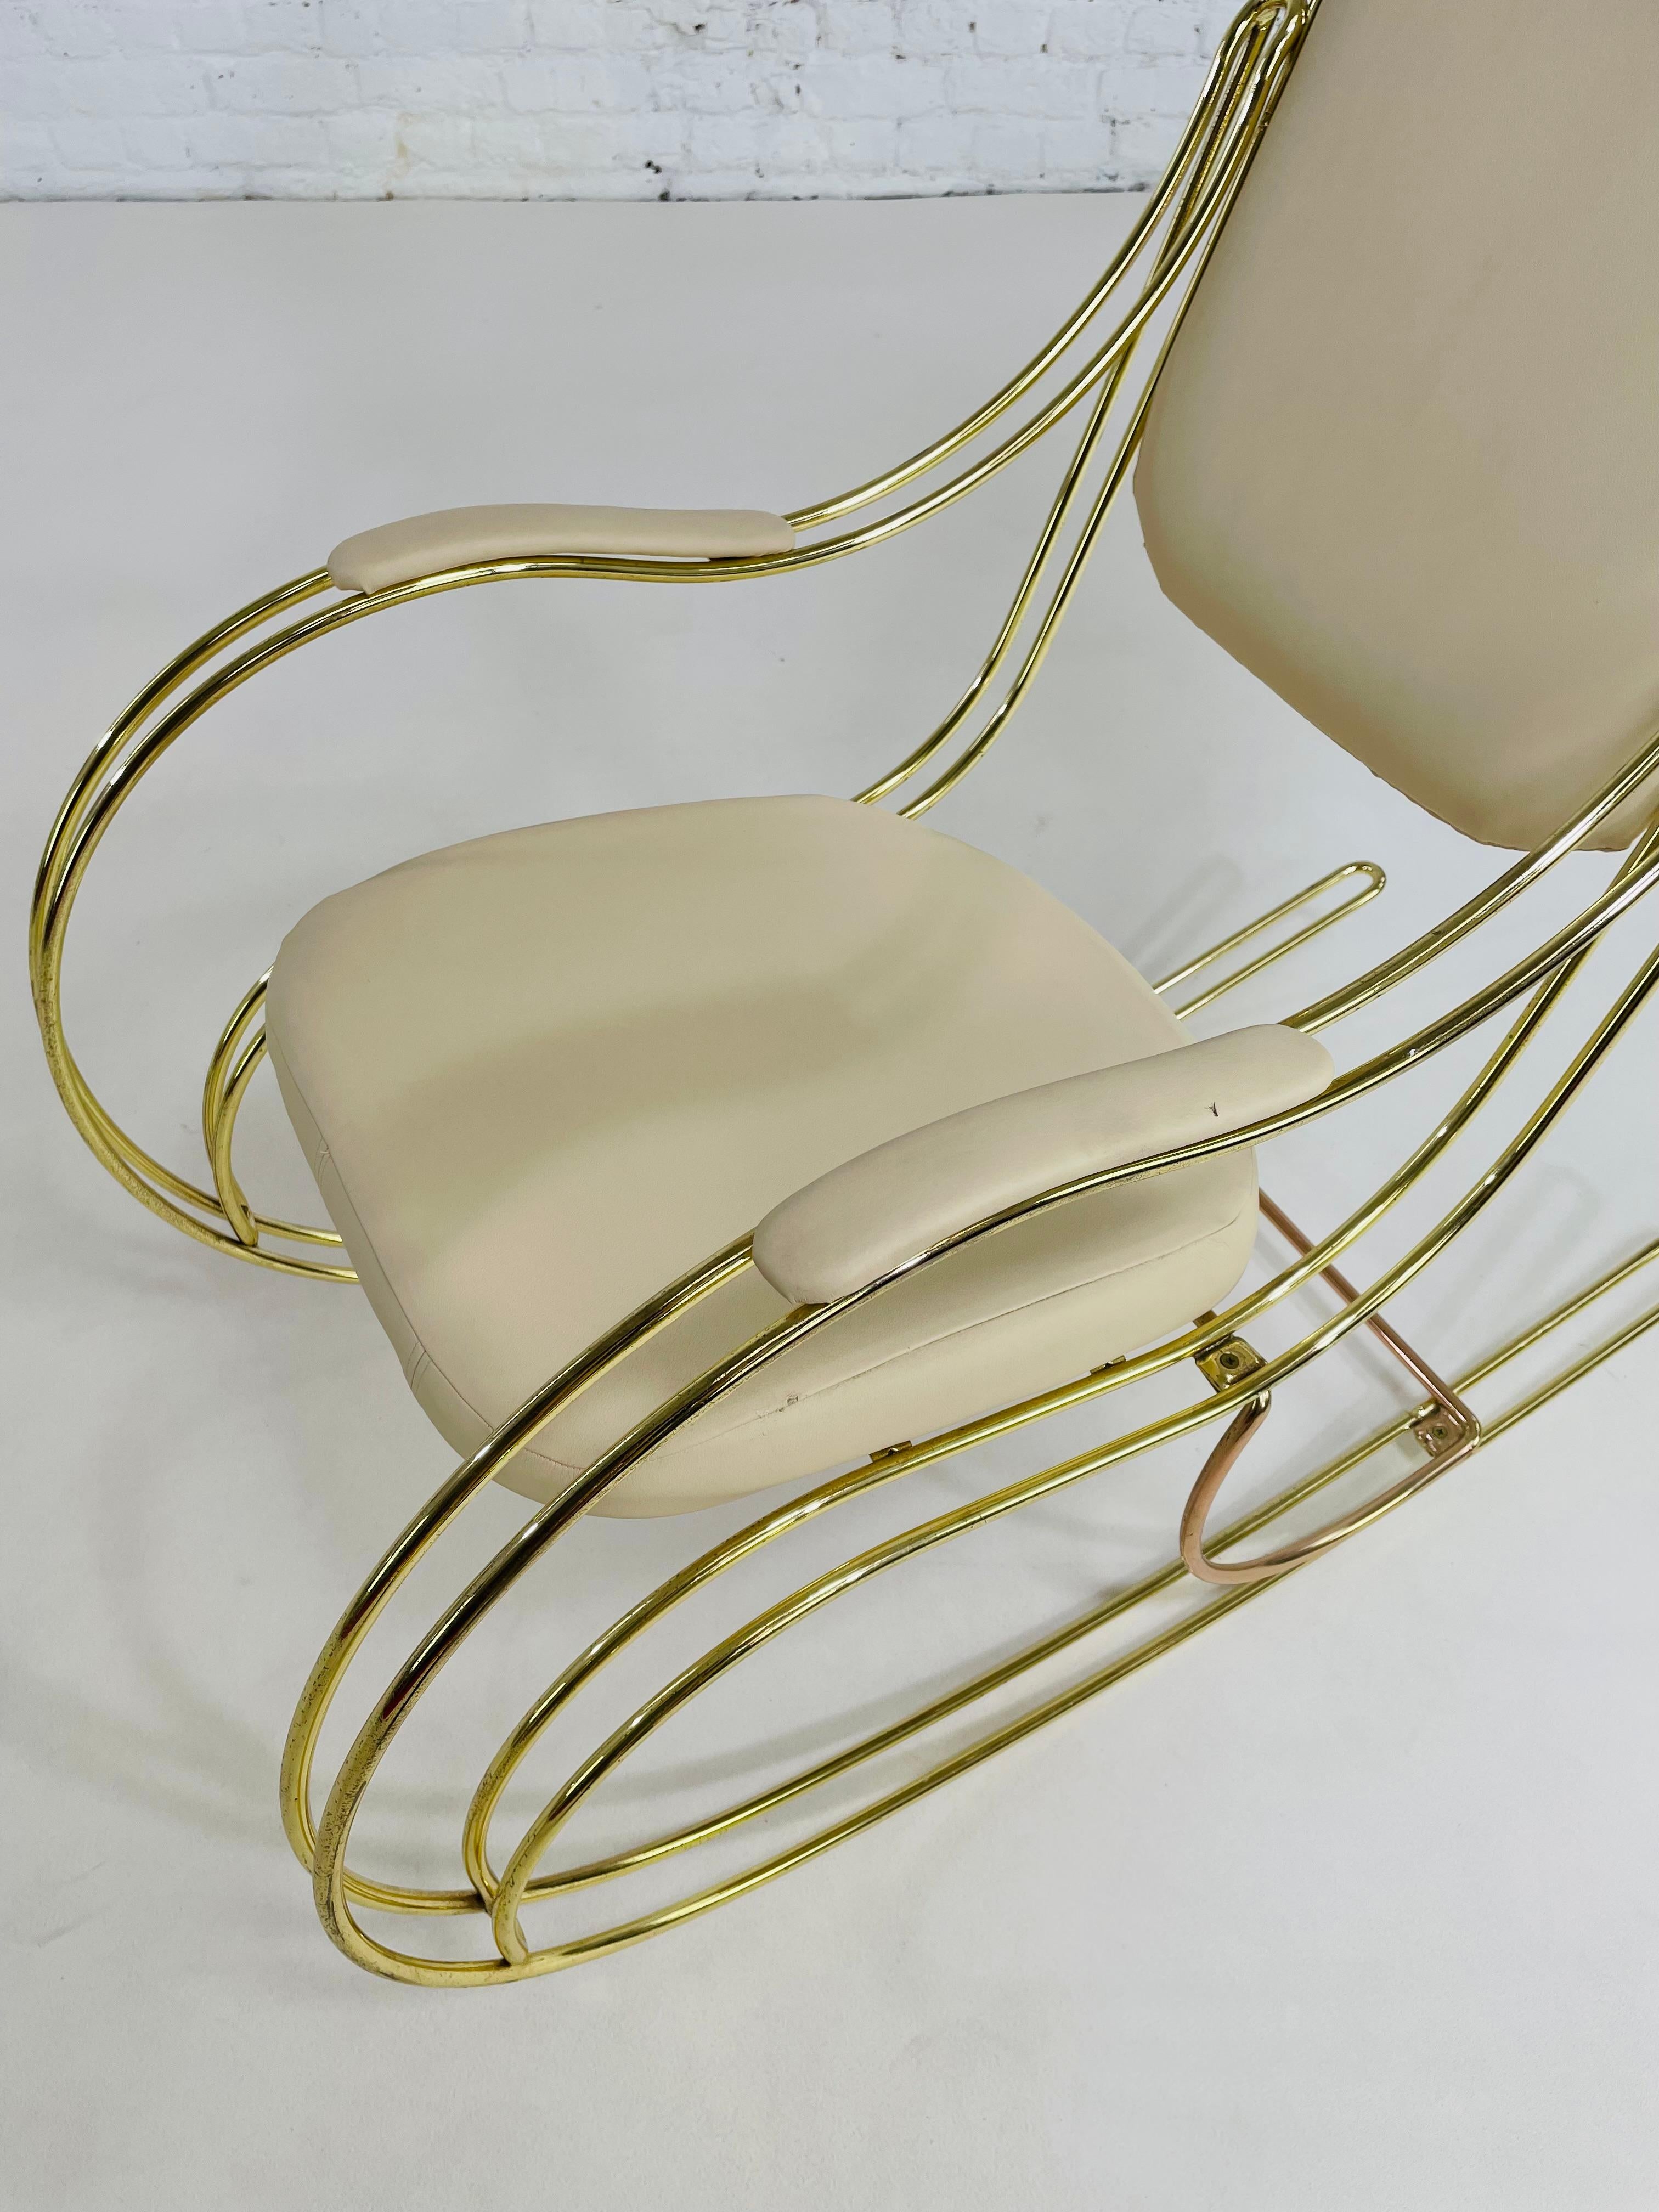 1960s-1970s Brass And Beige Faux Leather Rocking Chair For Sale 12